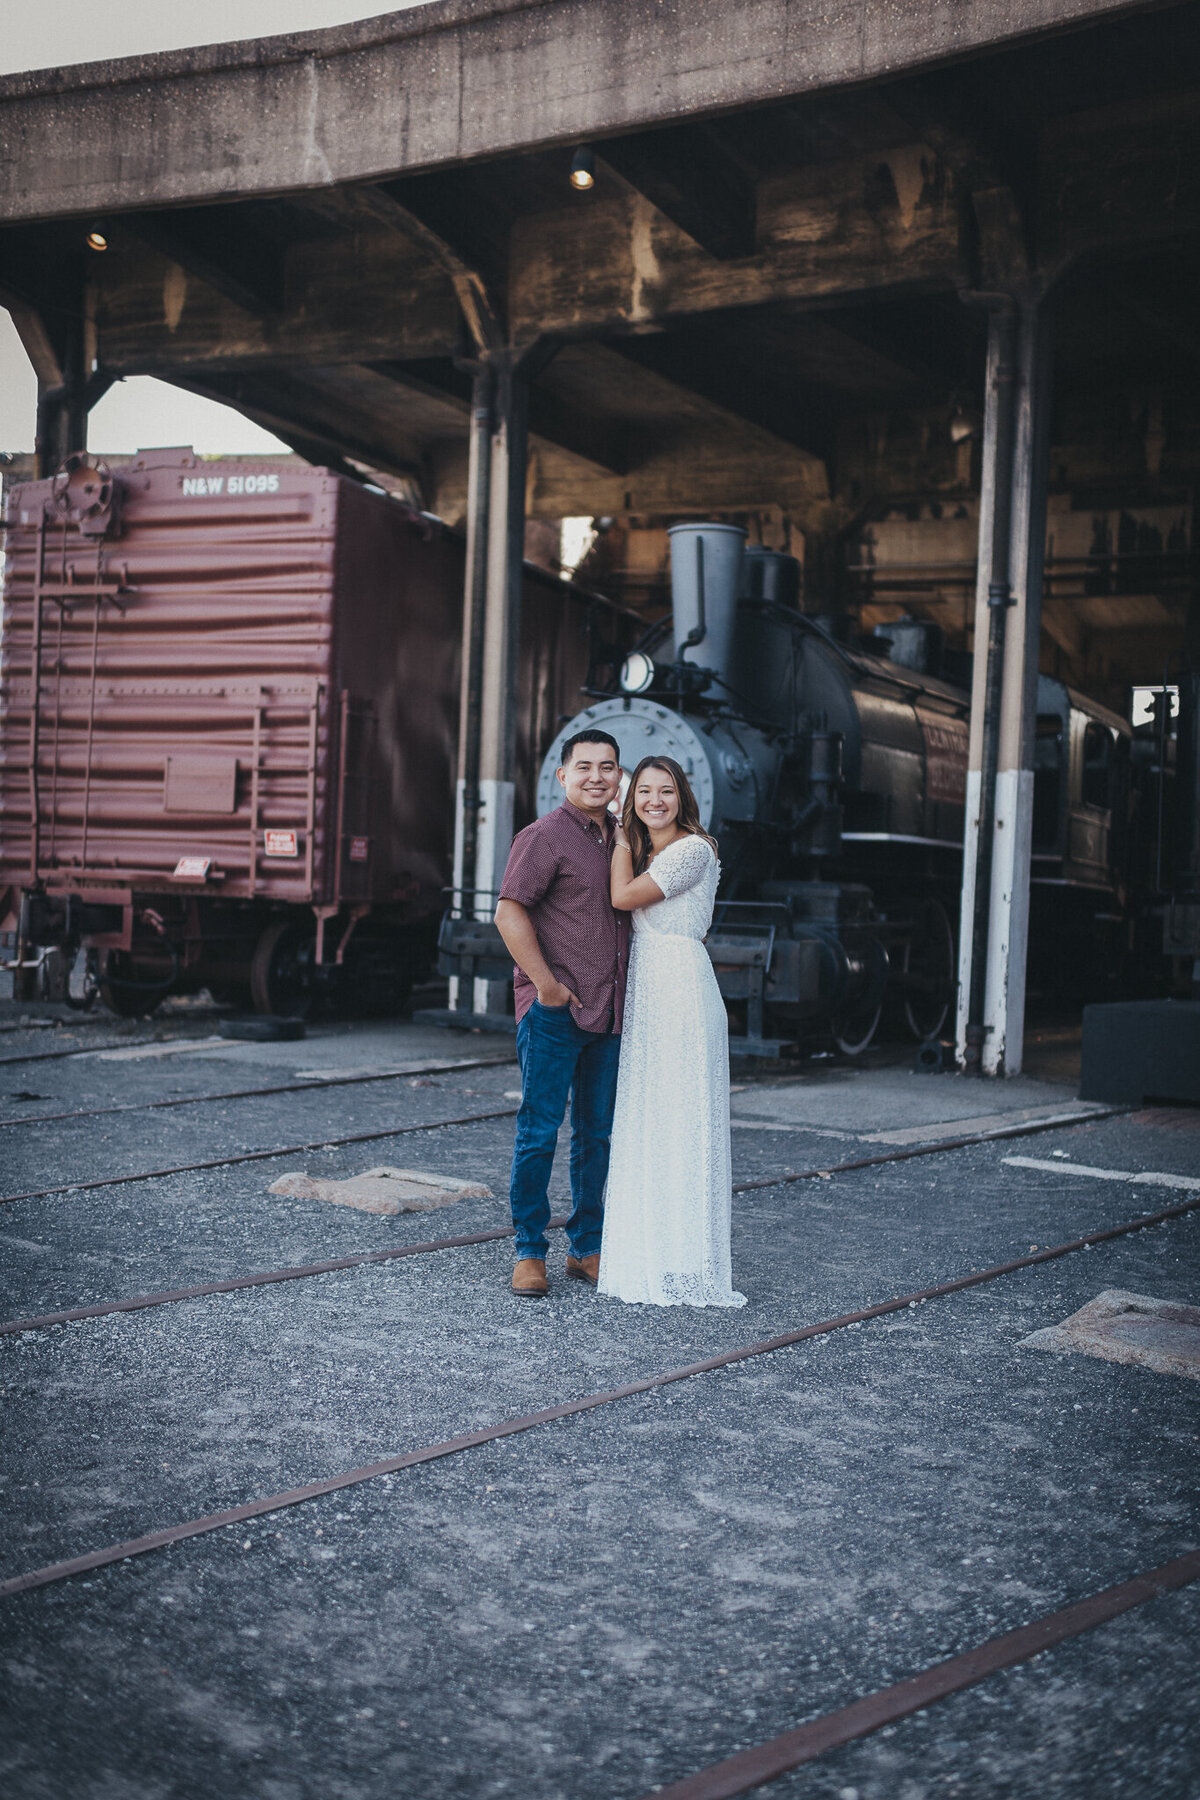 Engagement session at the georgia rail road museum